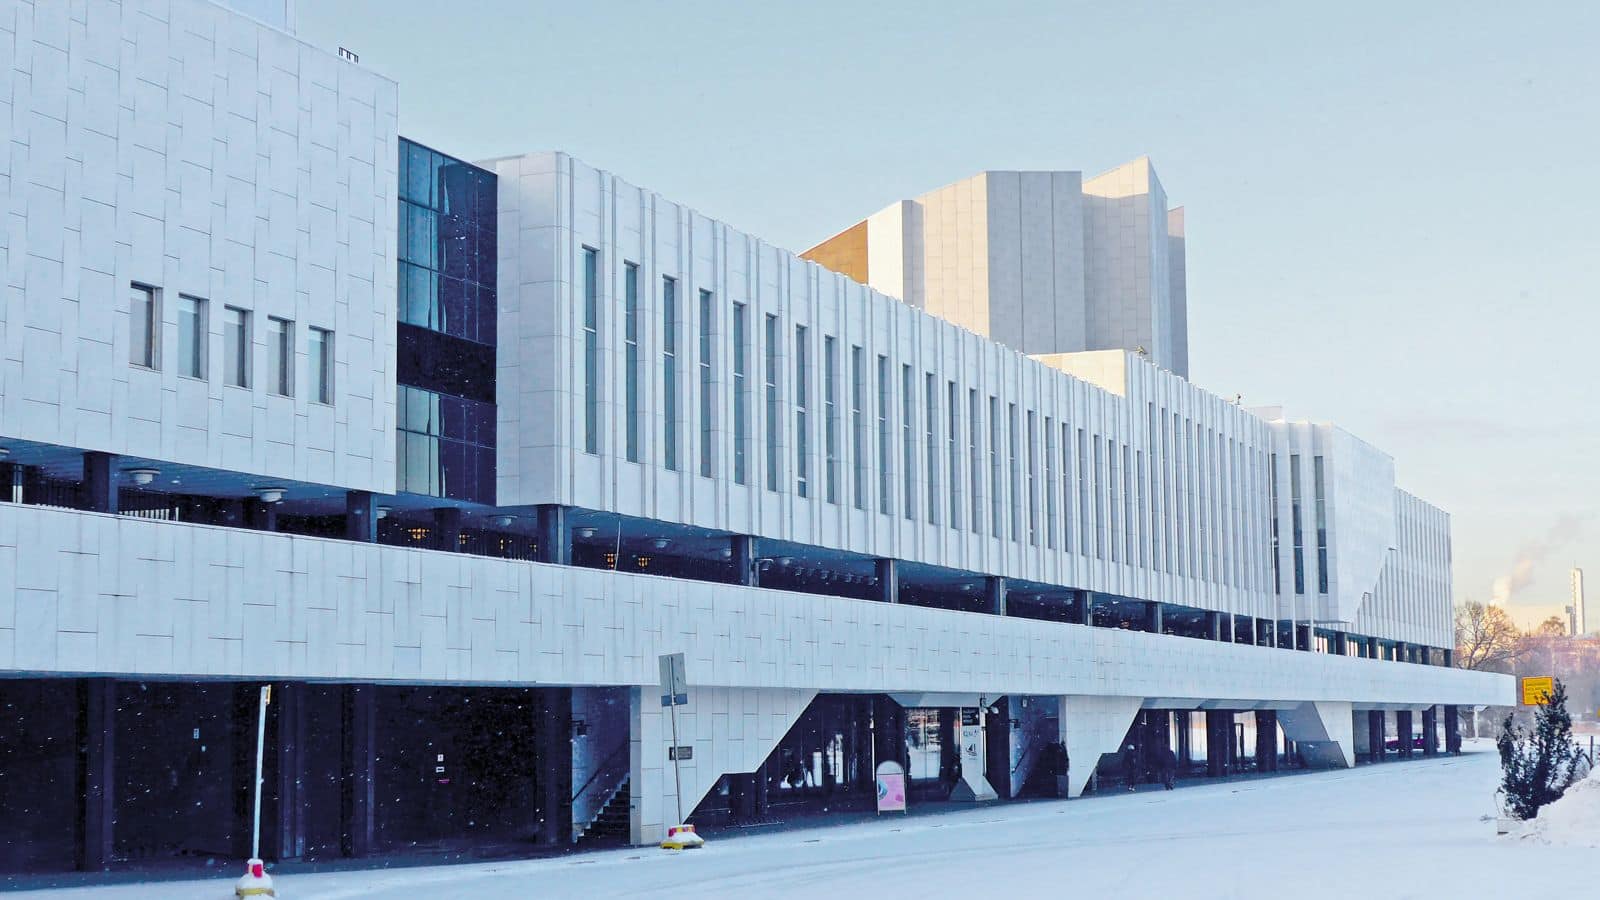 Check out Helsinki's modern architecture with this travel guide